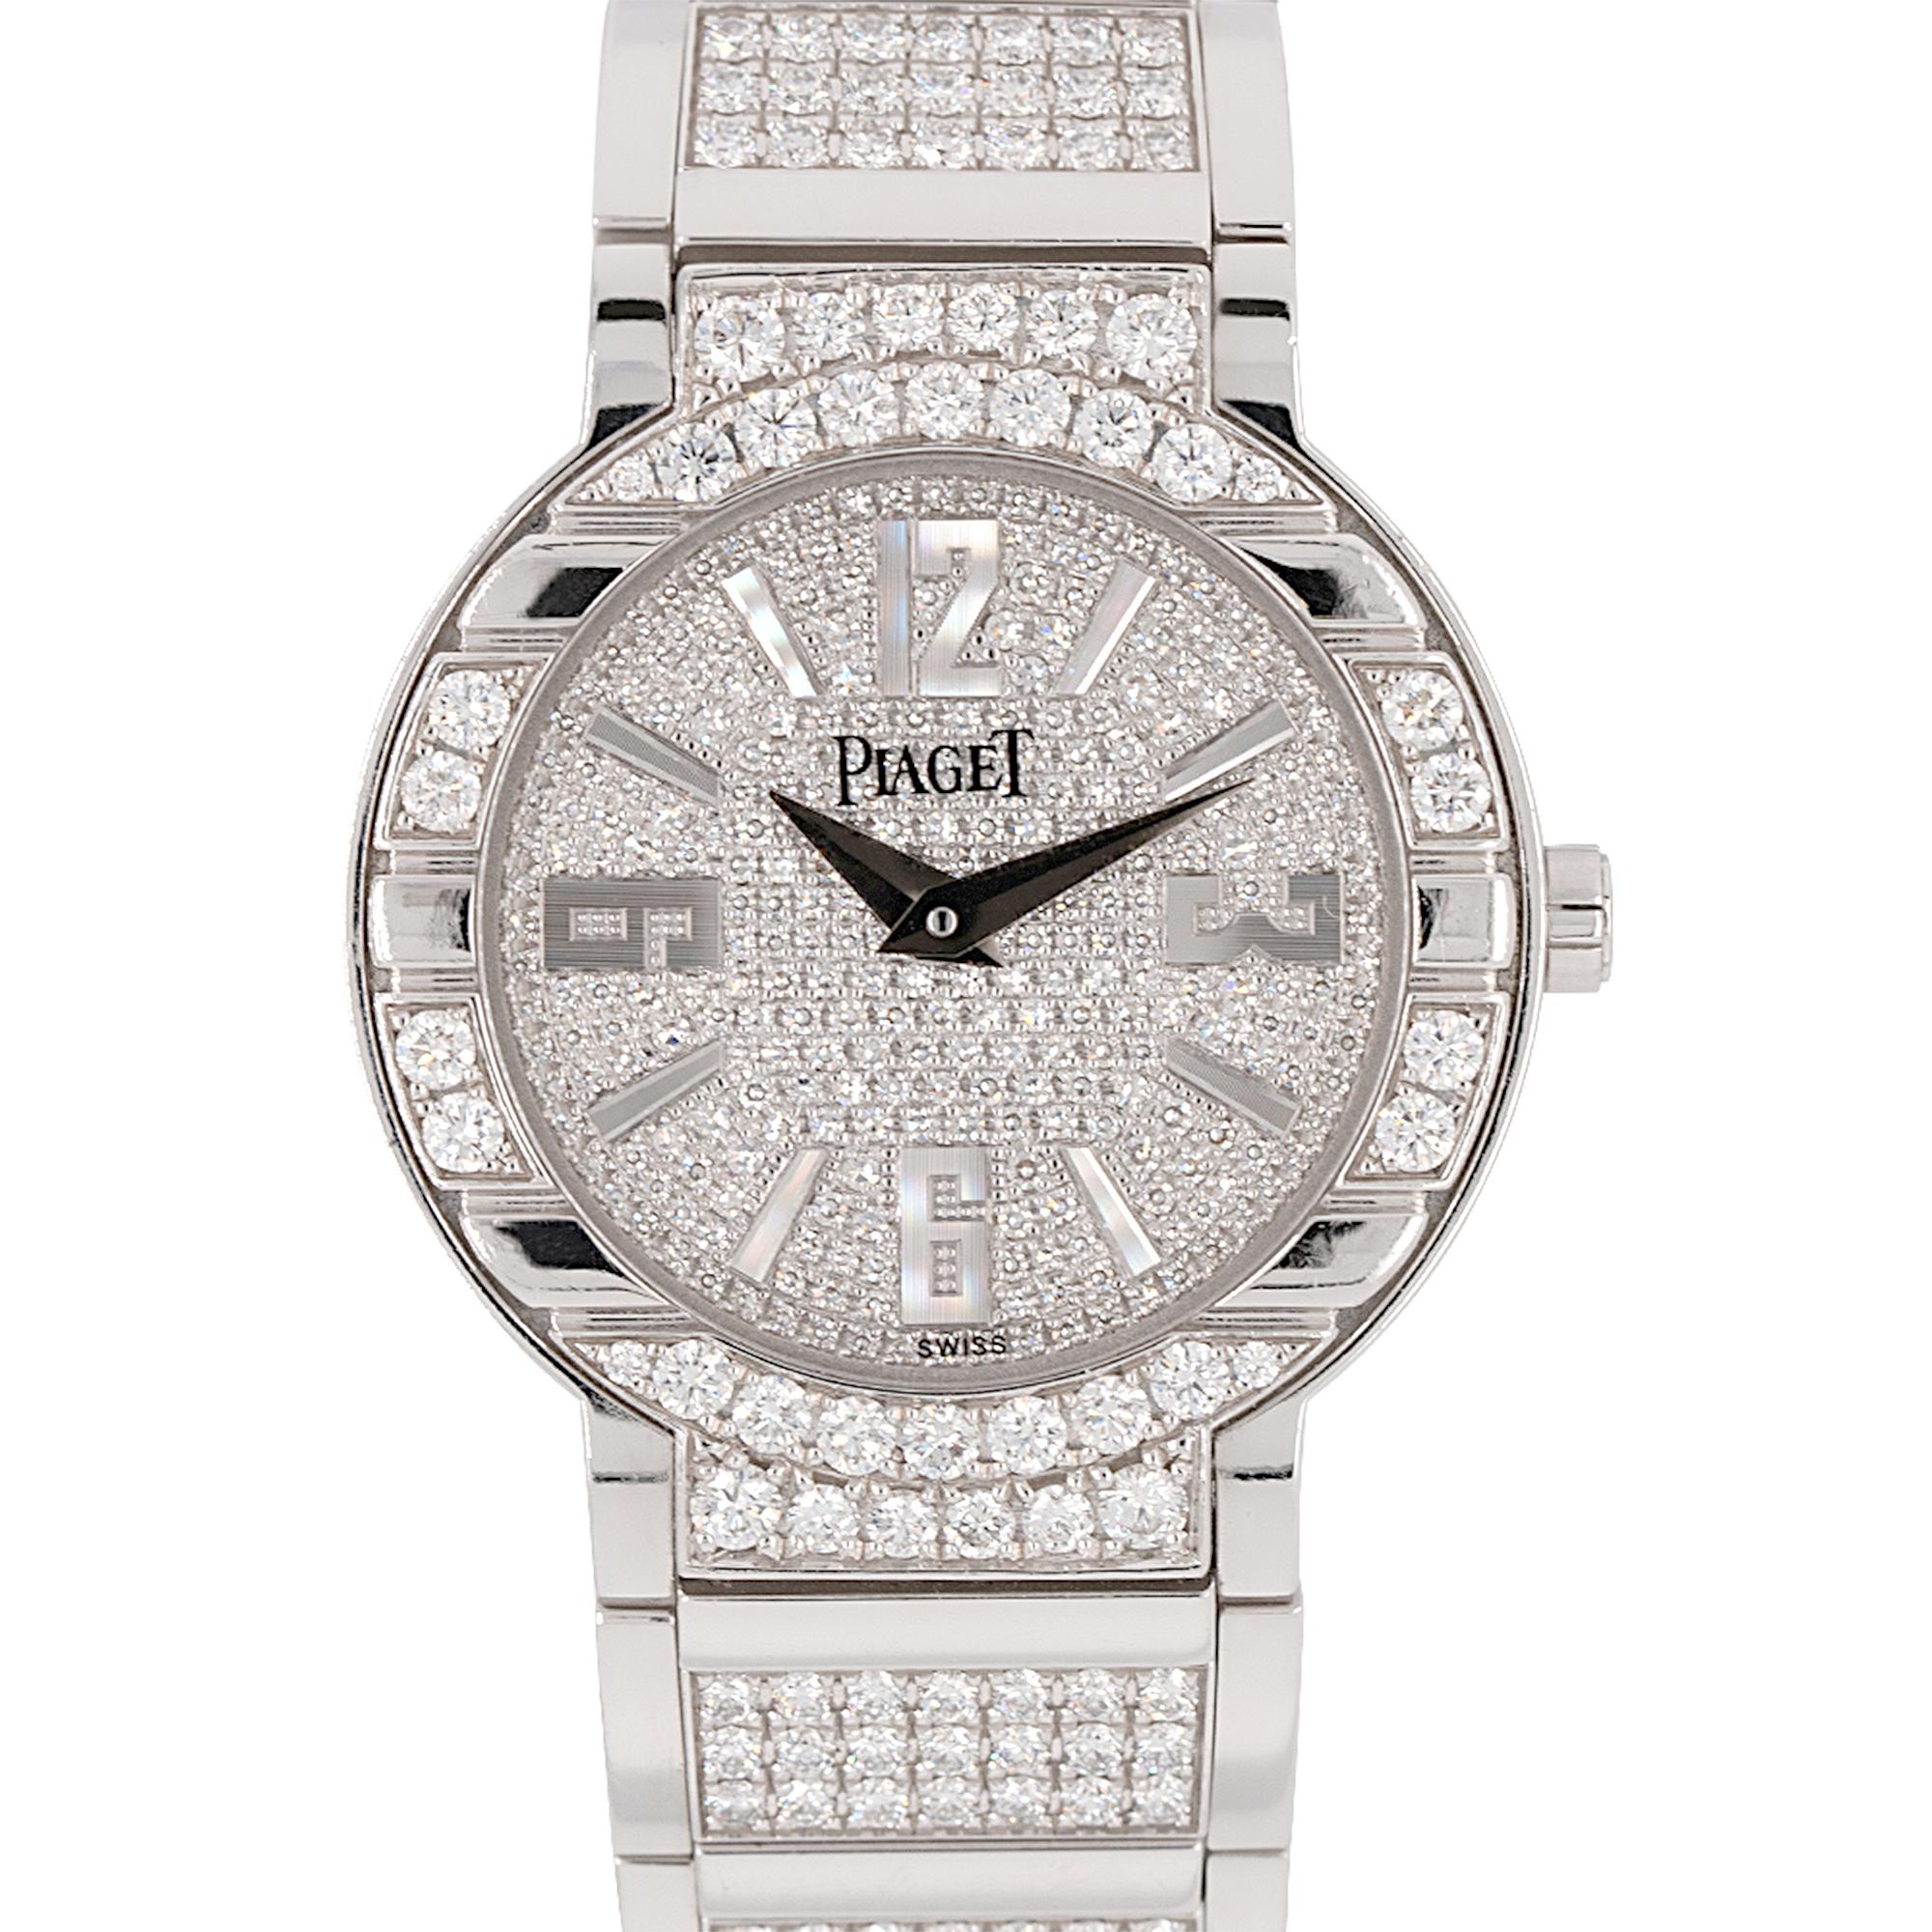 The Piaget Polo is an exquisite watch that embodies the brand's dedication to luxury and craftsmanship. With its 18k white gold case and a diameter of 32mm, it exudes elegance and sophistication. The diamond pave'd dial, adorned with silver hands